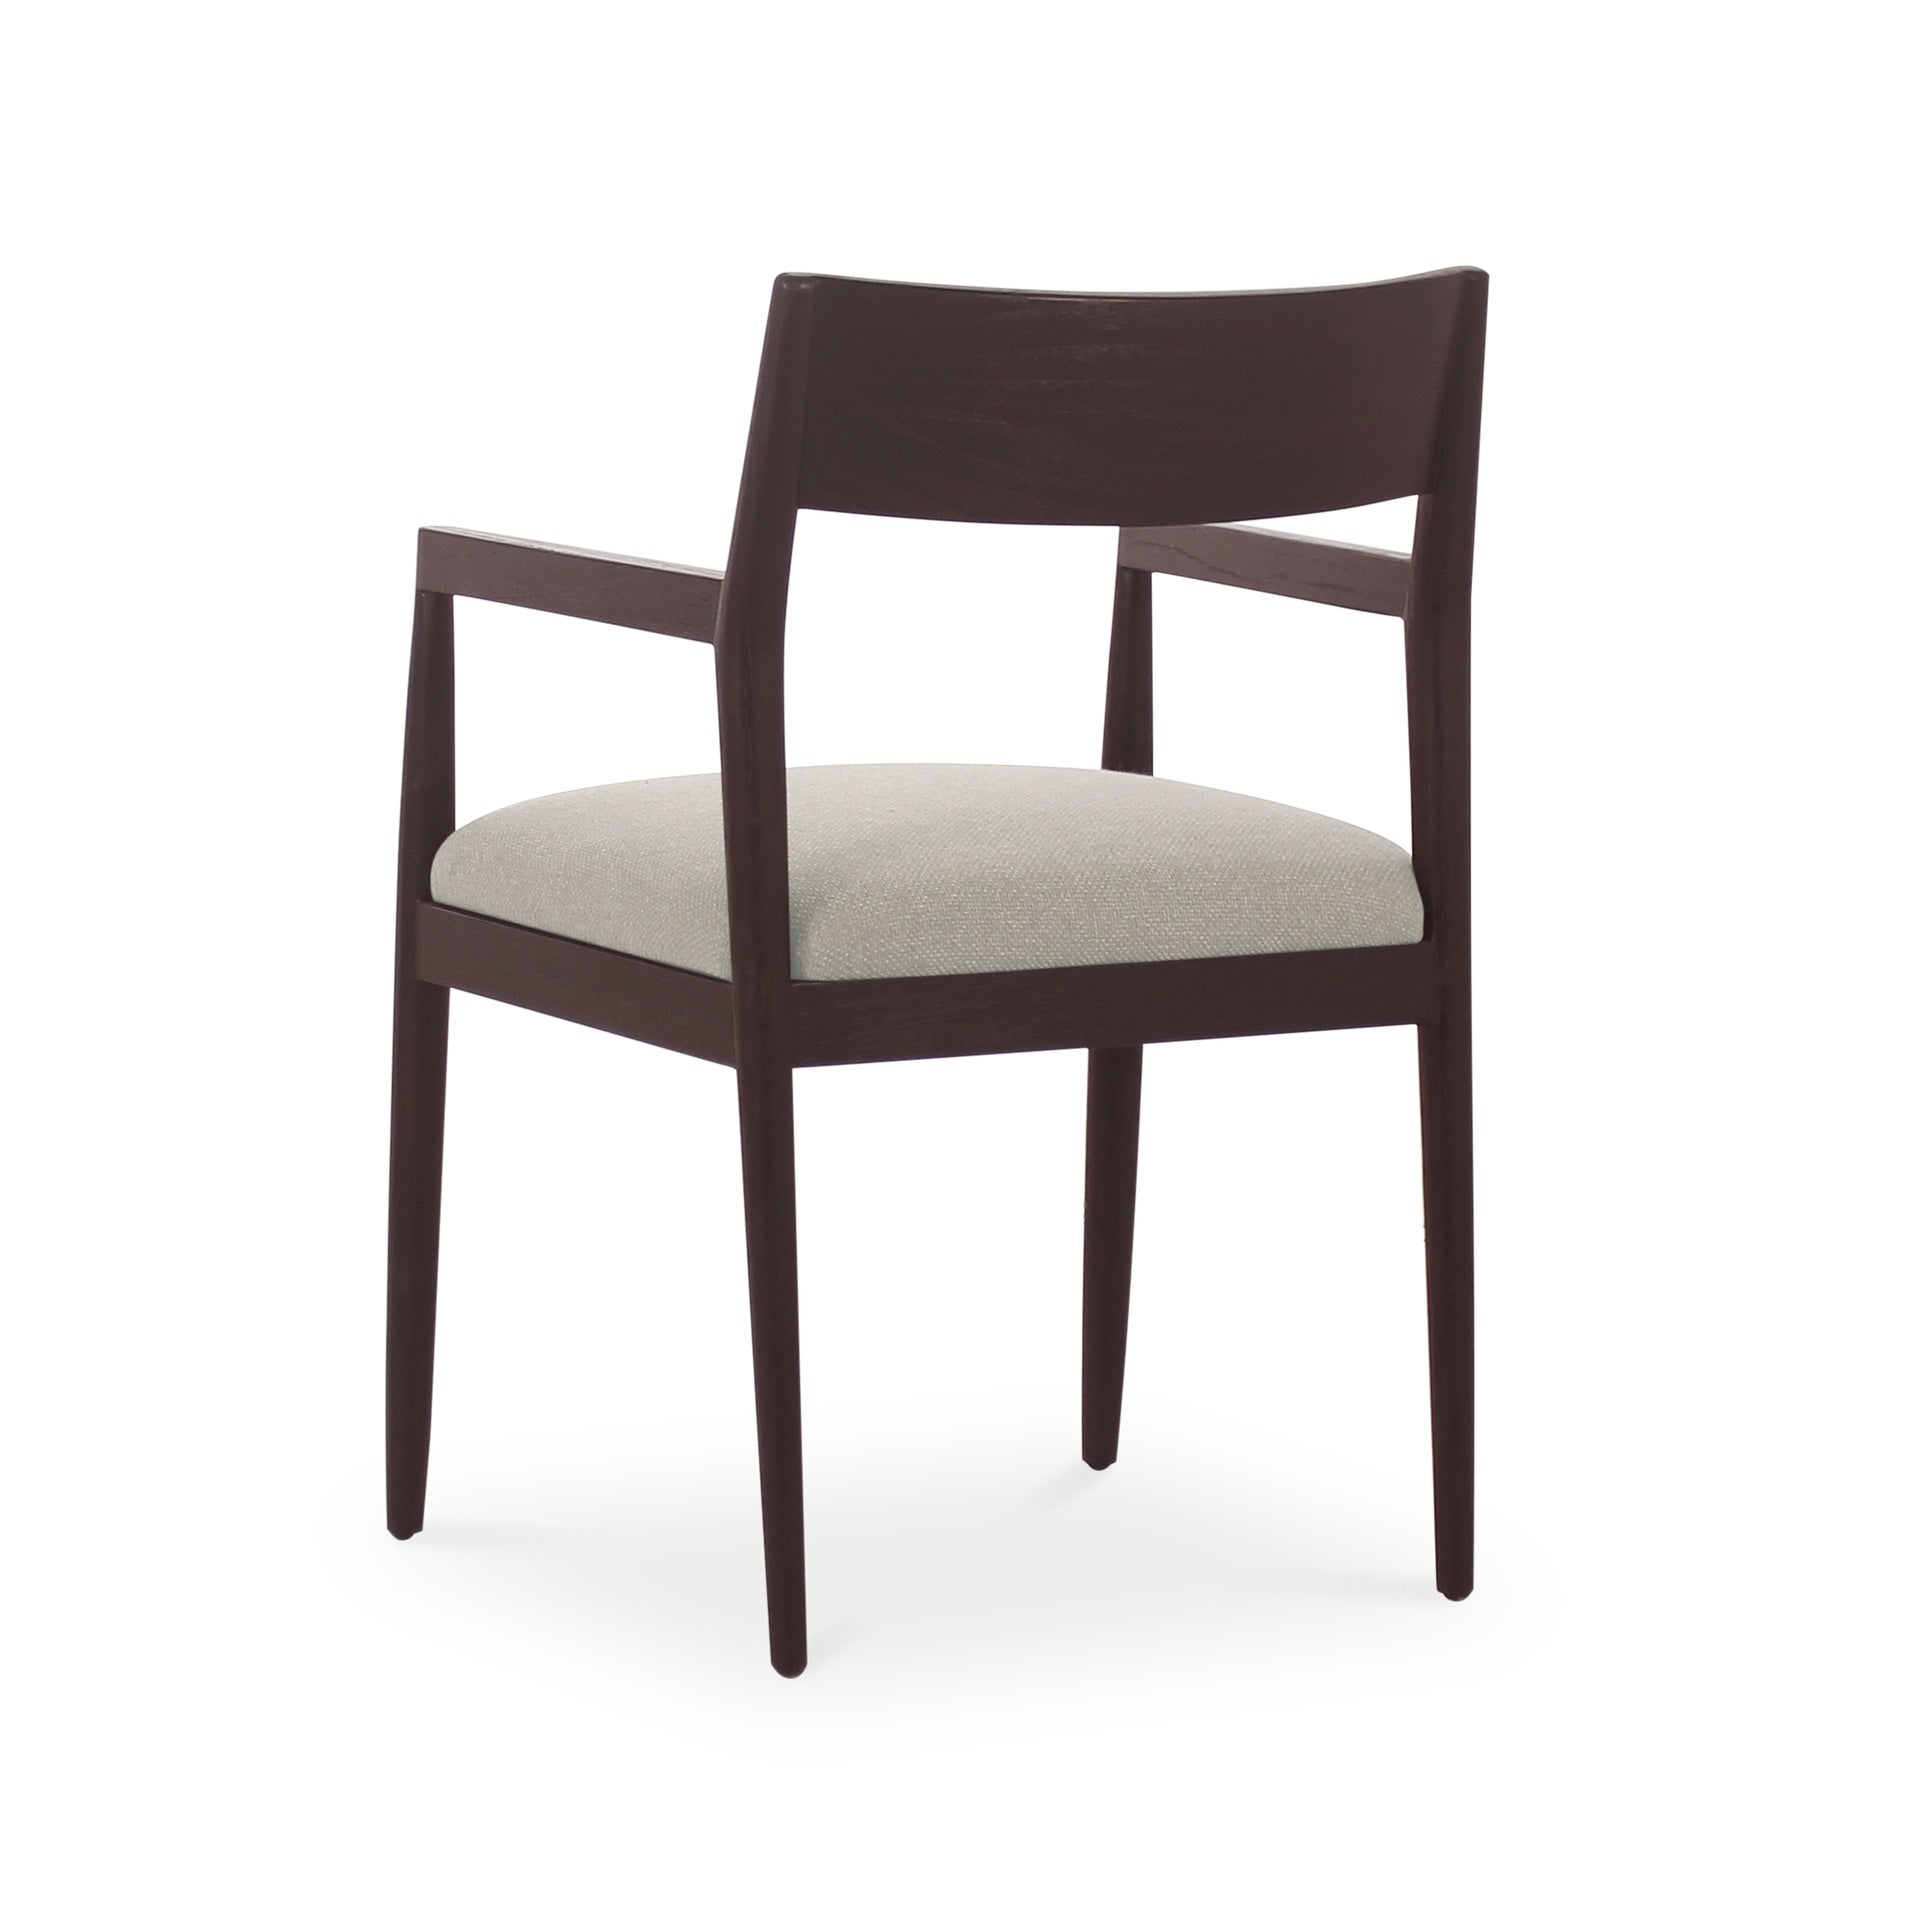 Lizzy Teak Dining Chair Walnut Finish in Monument Pearl White Fabric